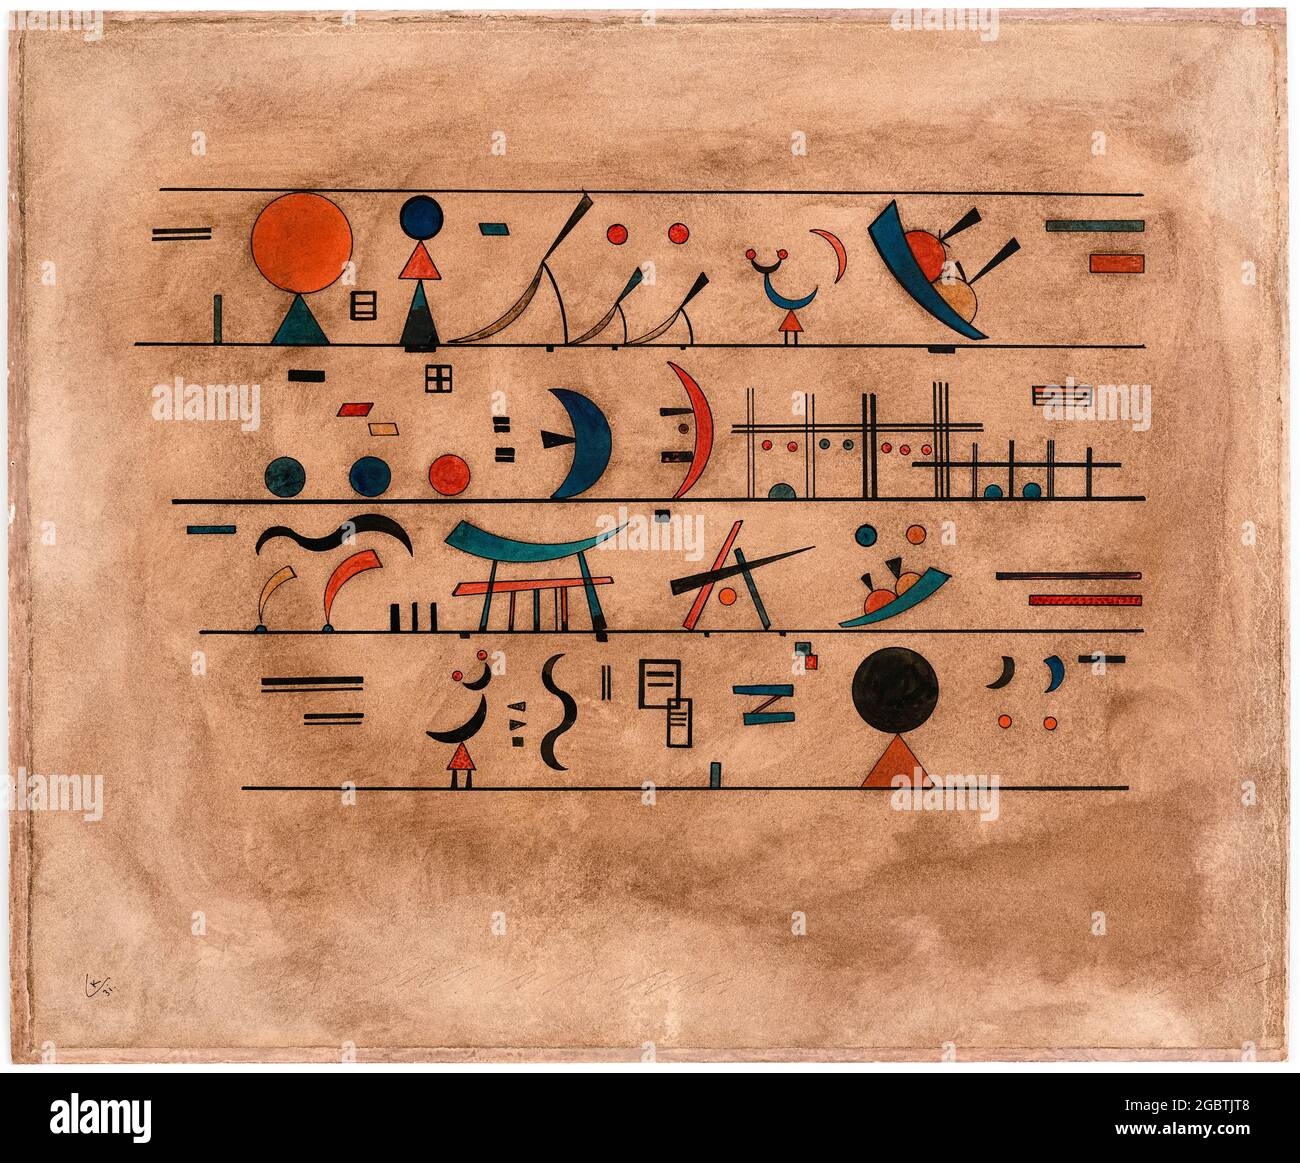 Wassily Kandinsky, Zeichenreihen. 1931 (Strings of Characters), abstract painting, 1931 Stock Photo